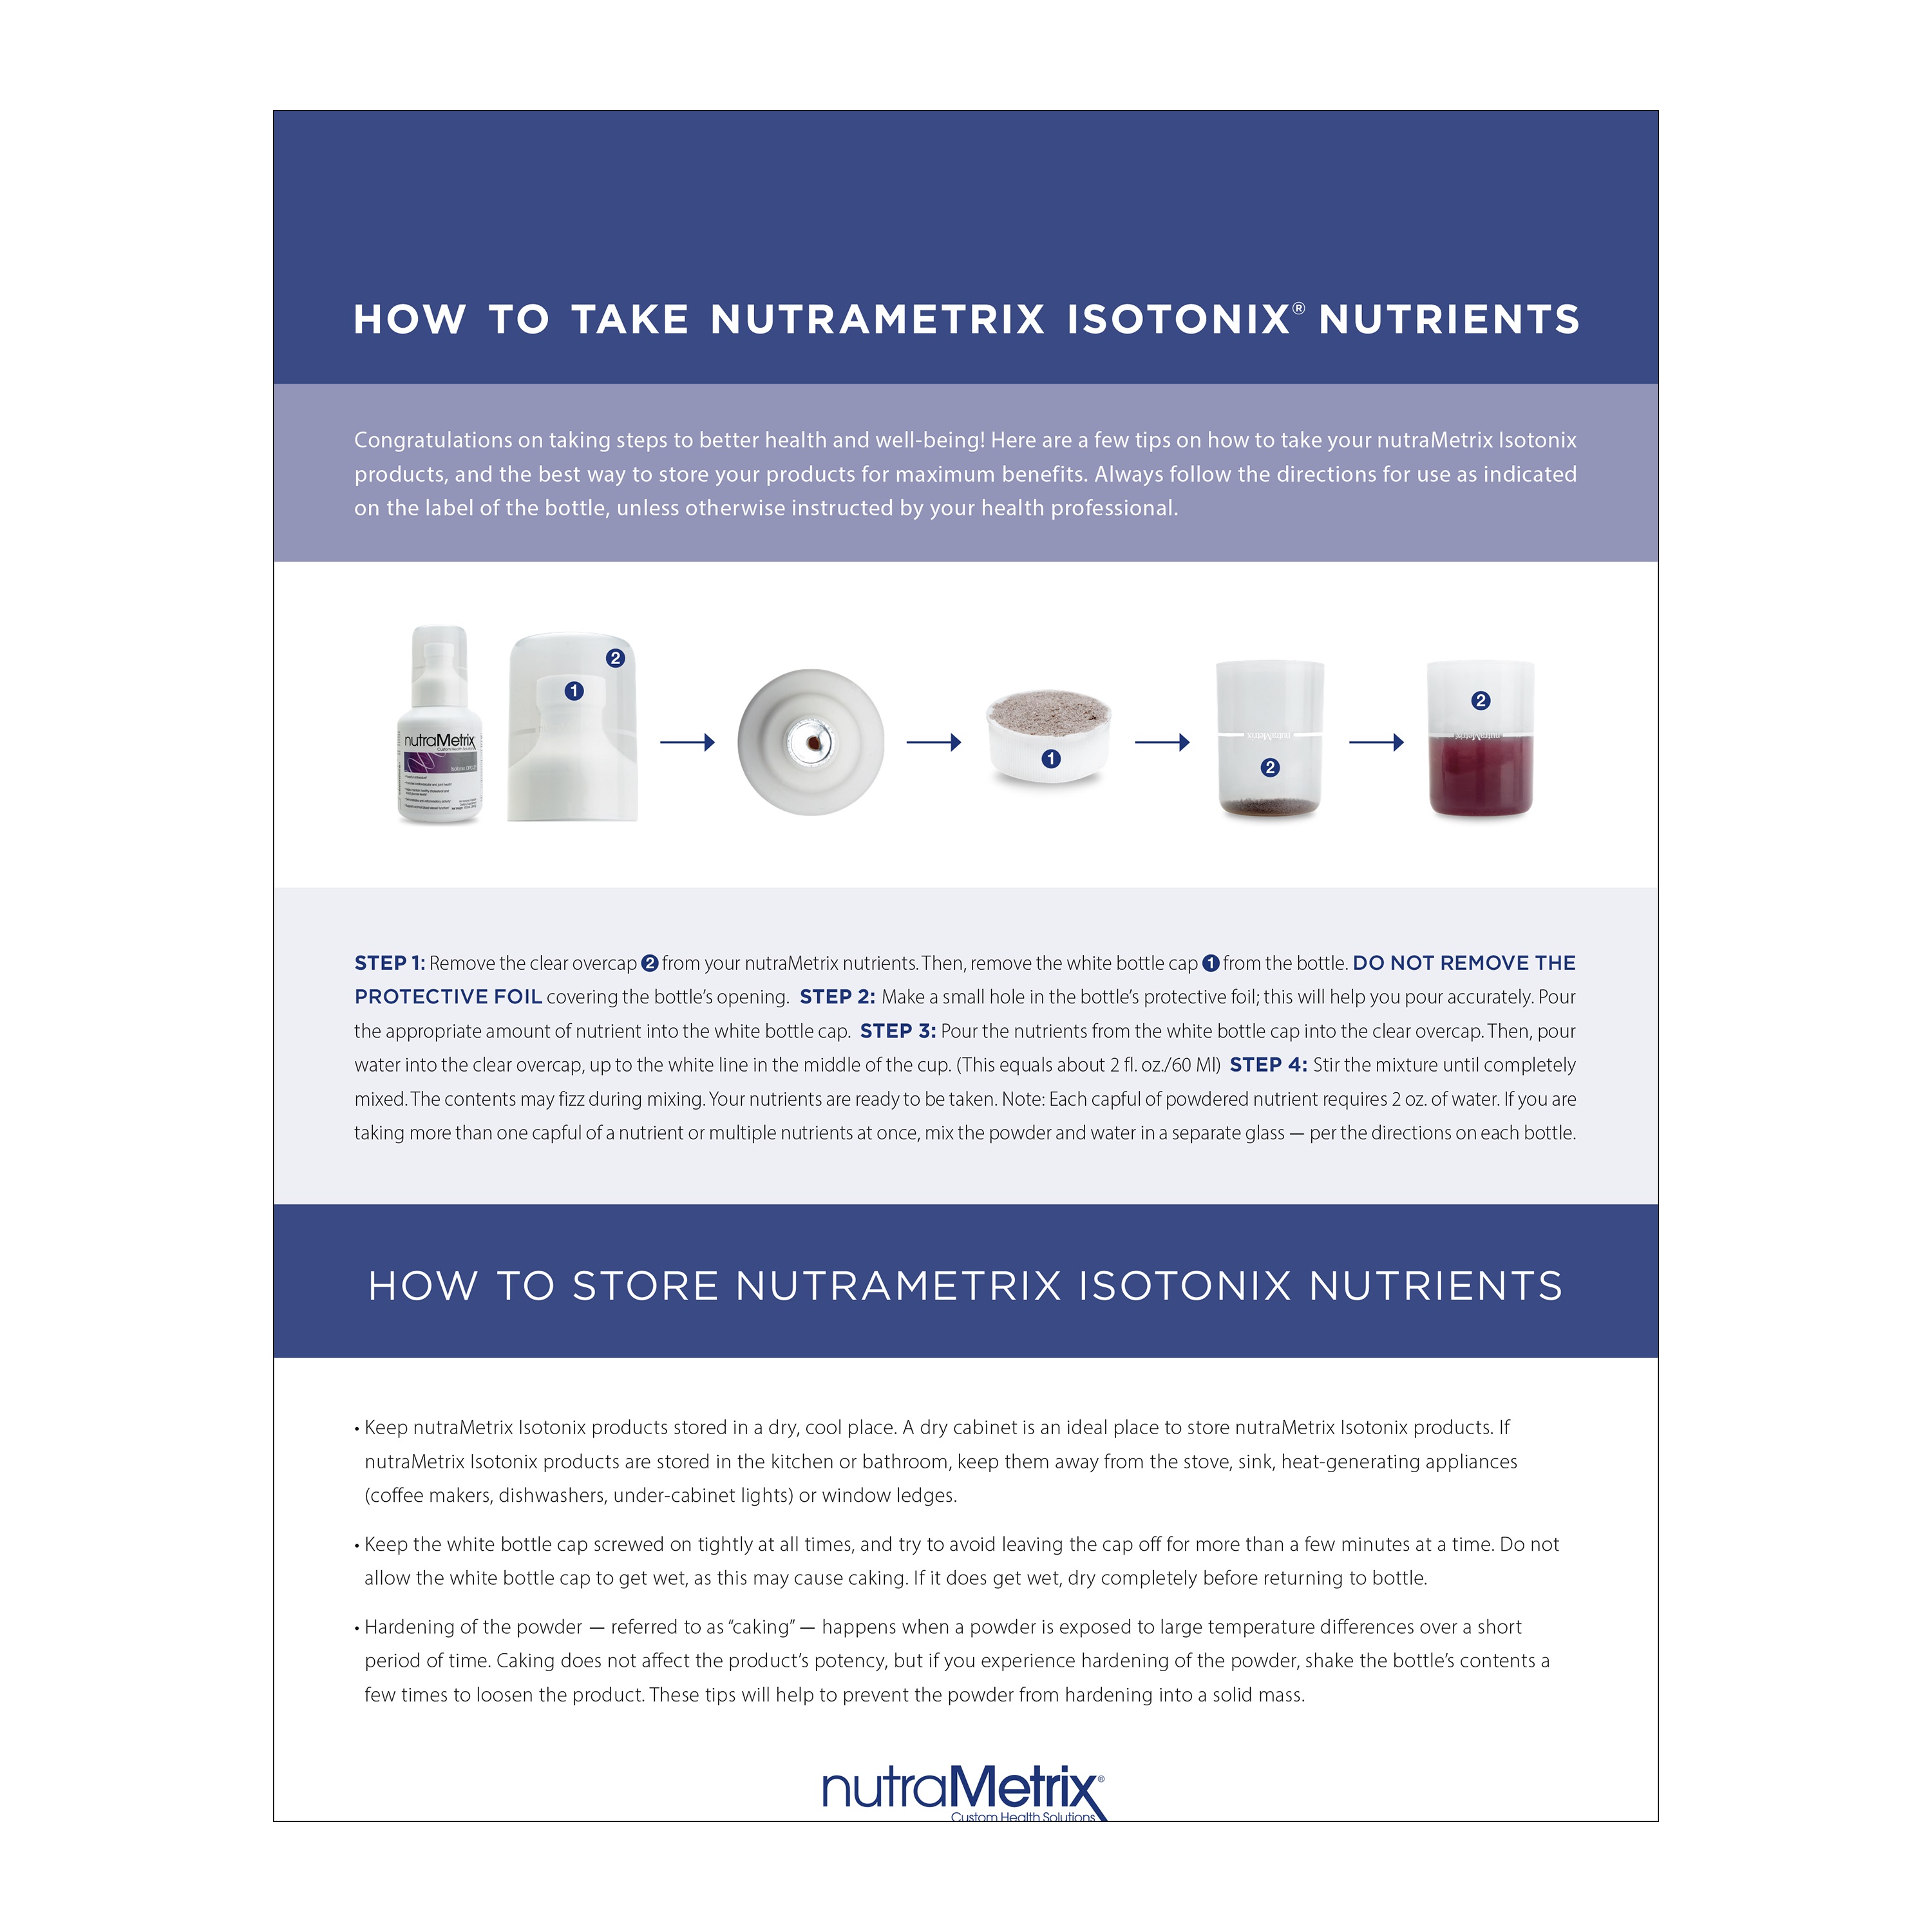 How To Take and Store nutraMetrix® Products*